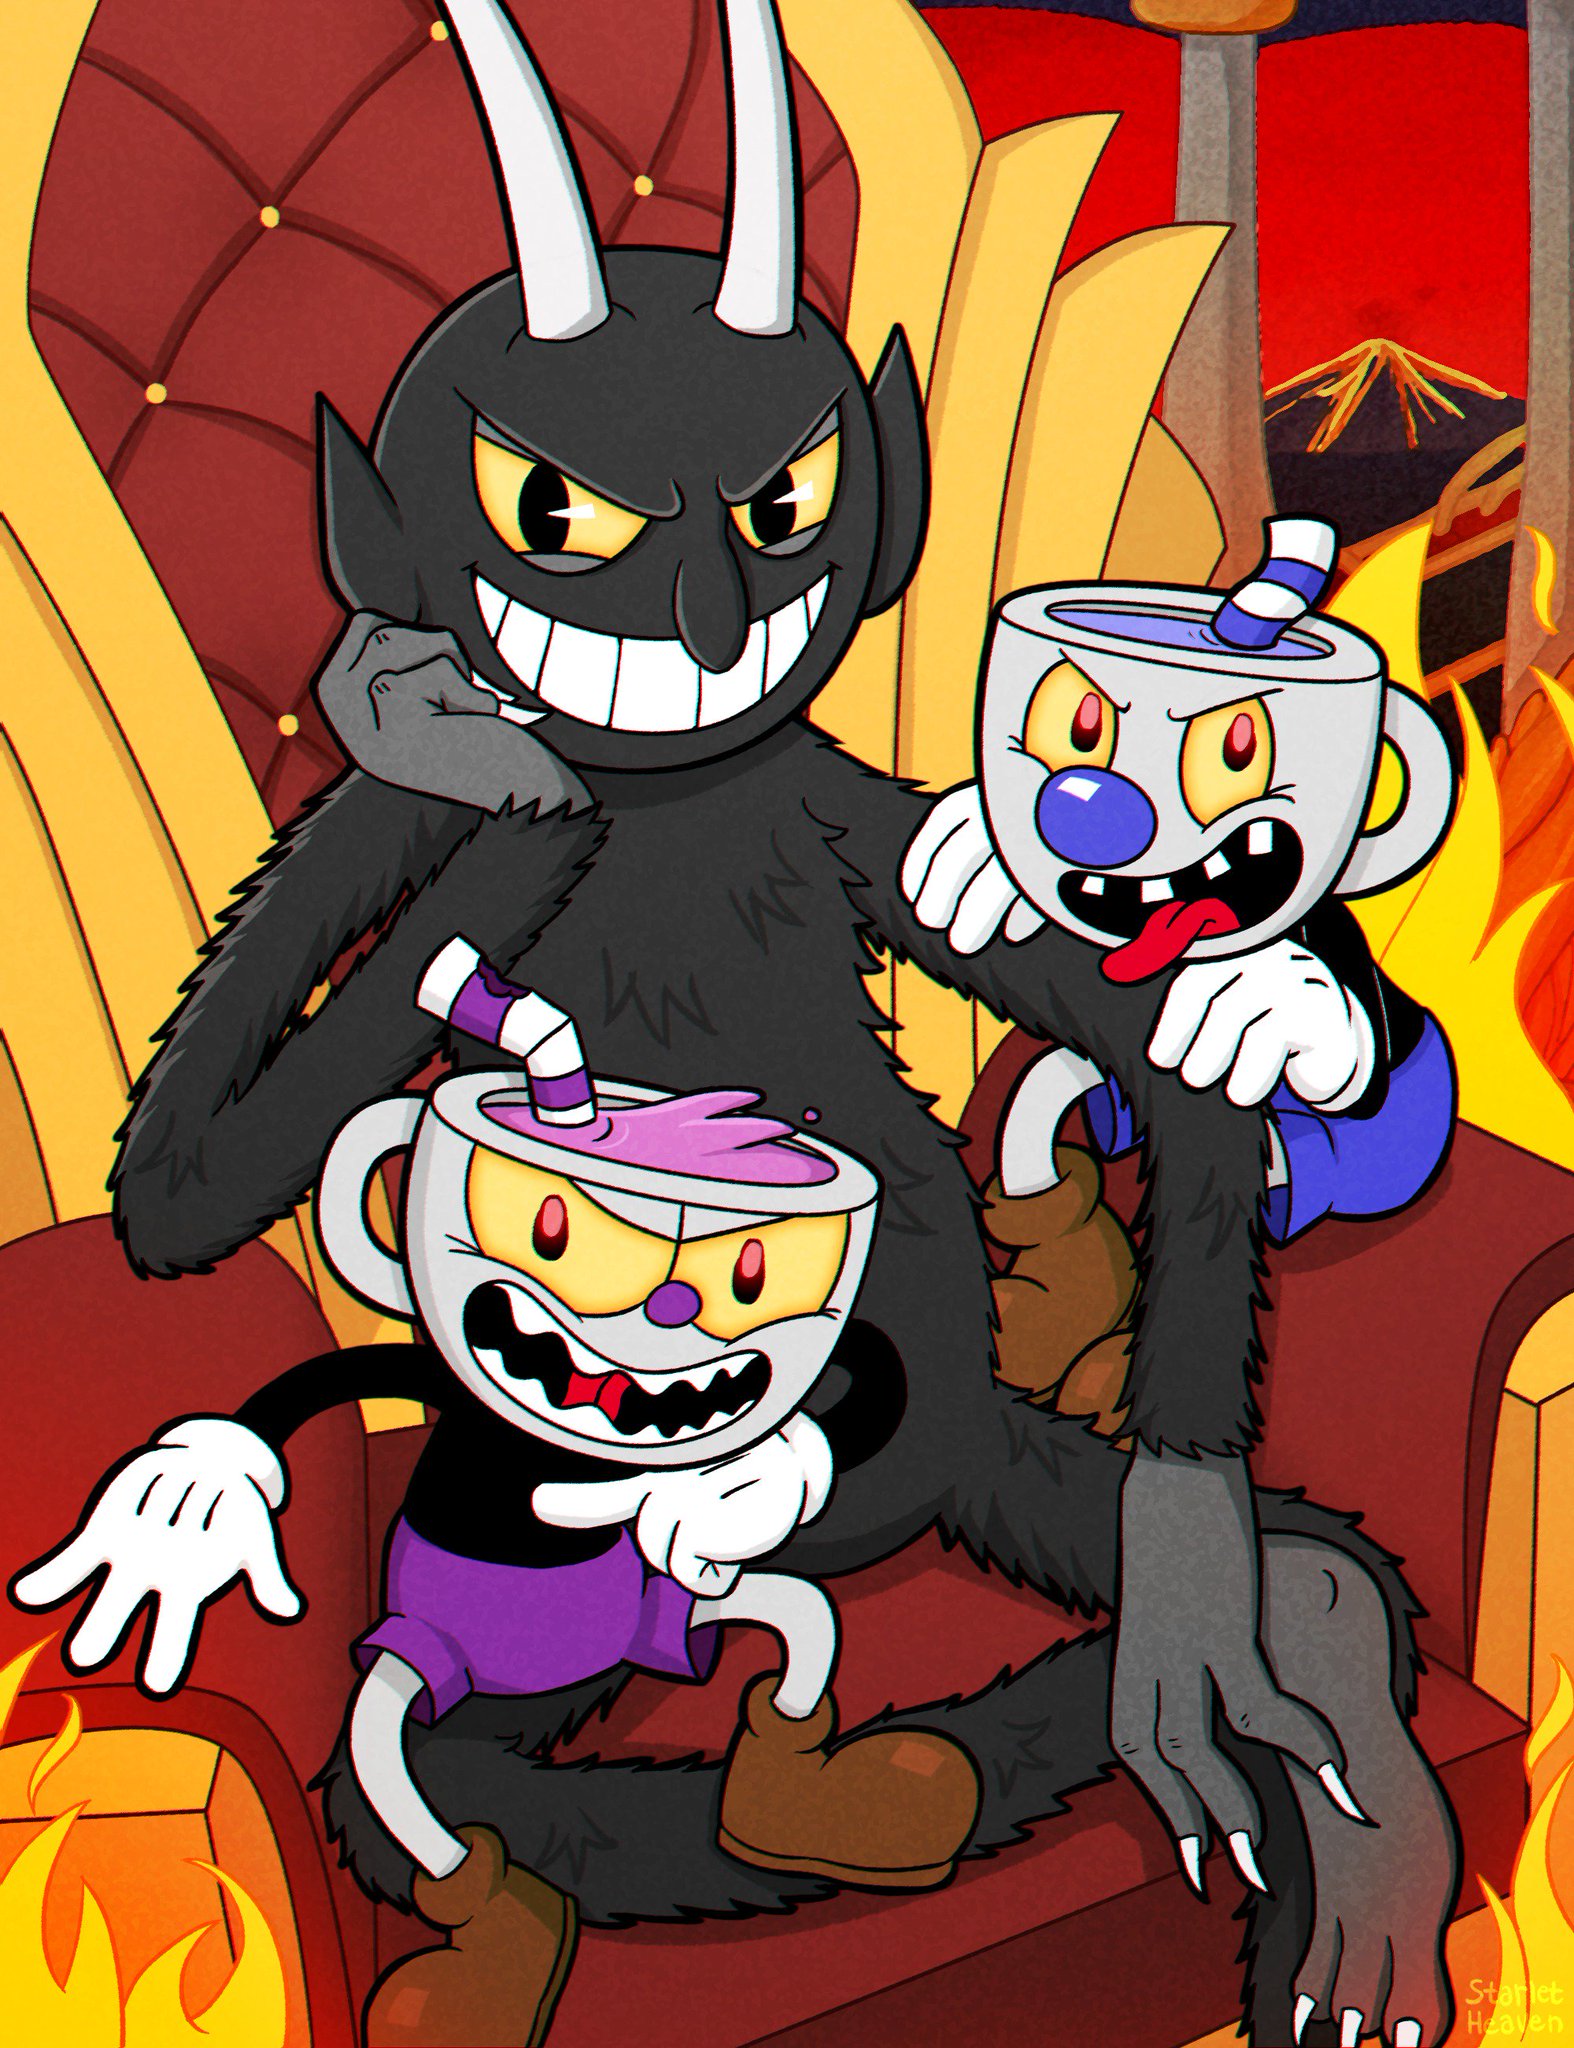 “The Devil and his new sons &gt;:^)

#cuphead #mugm...